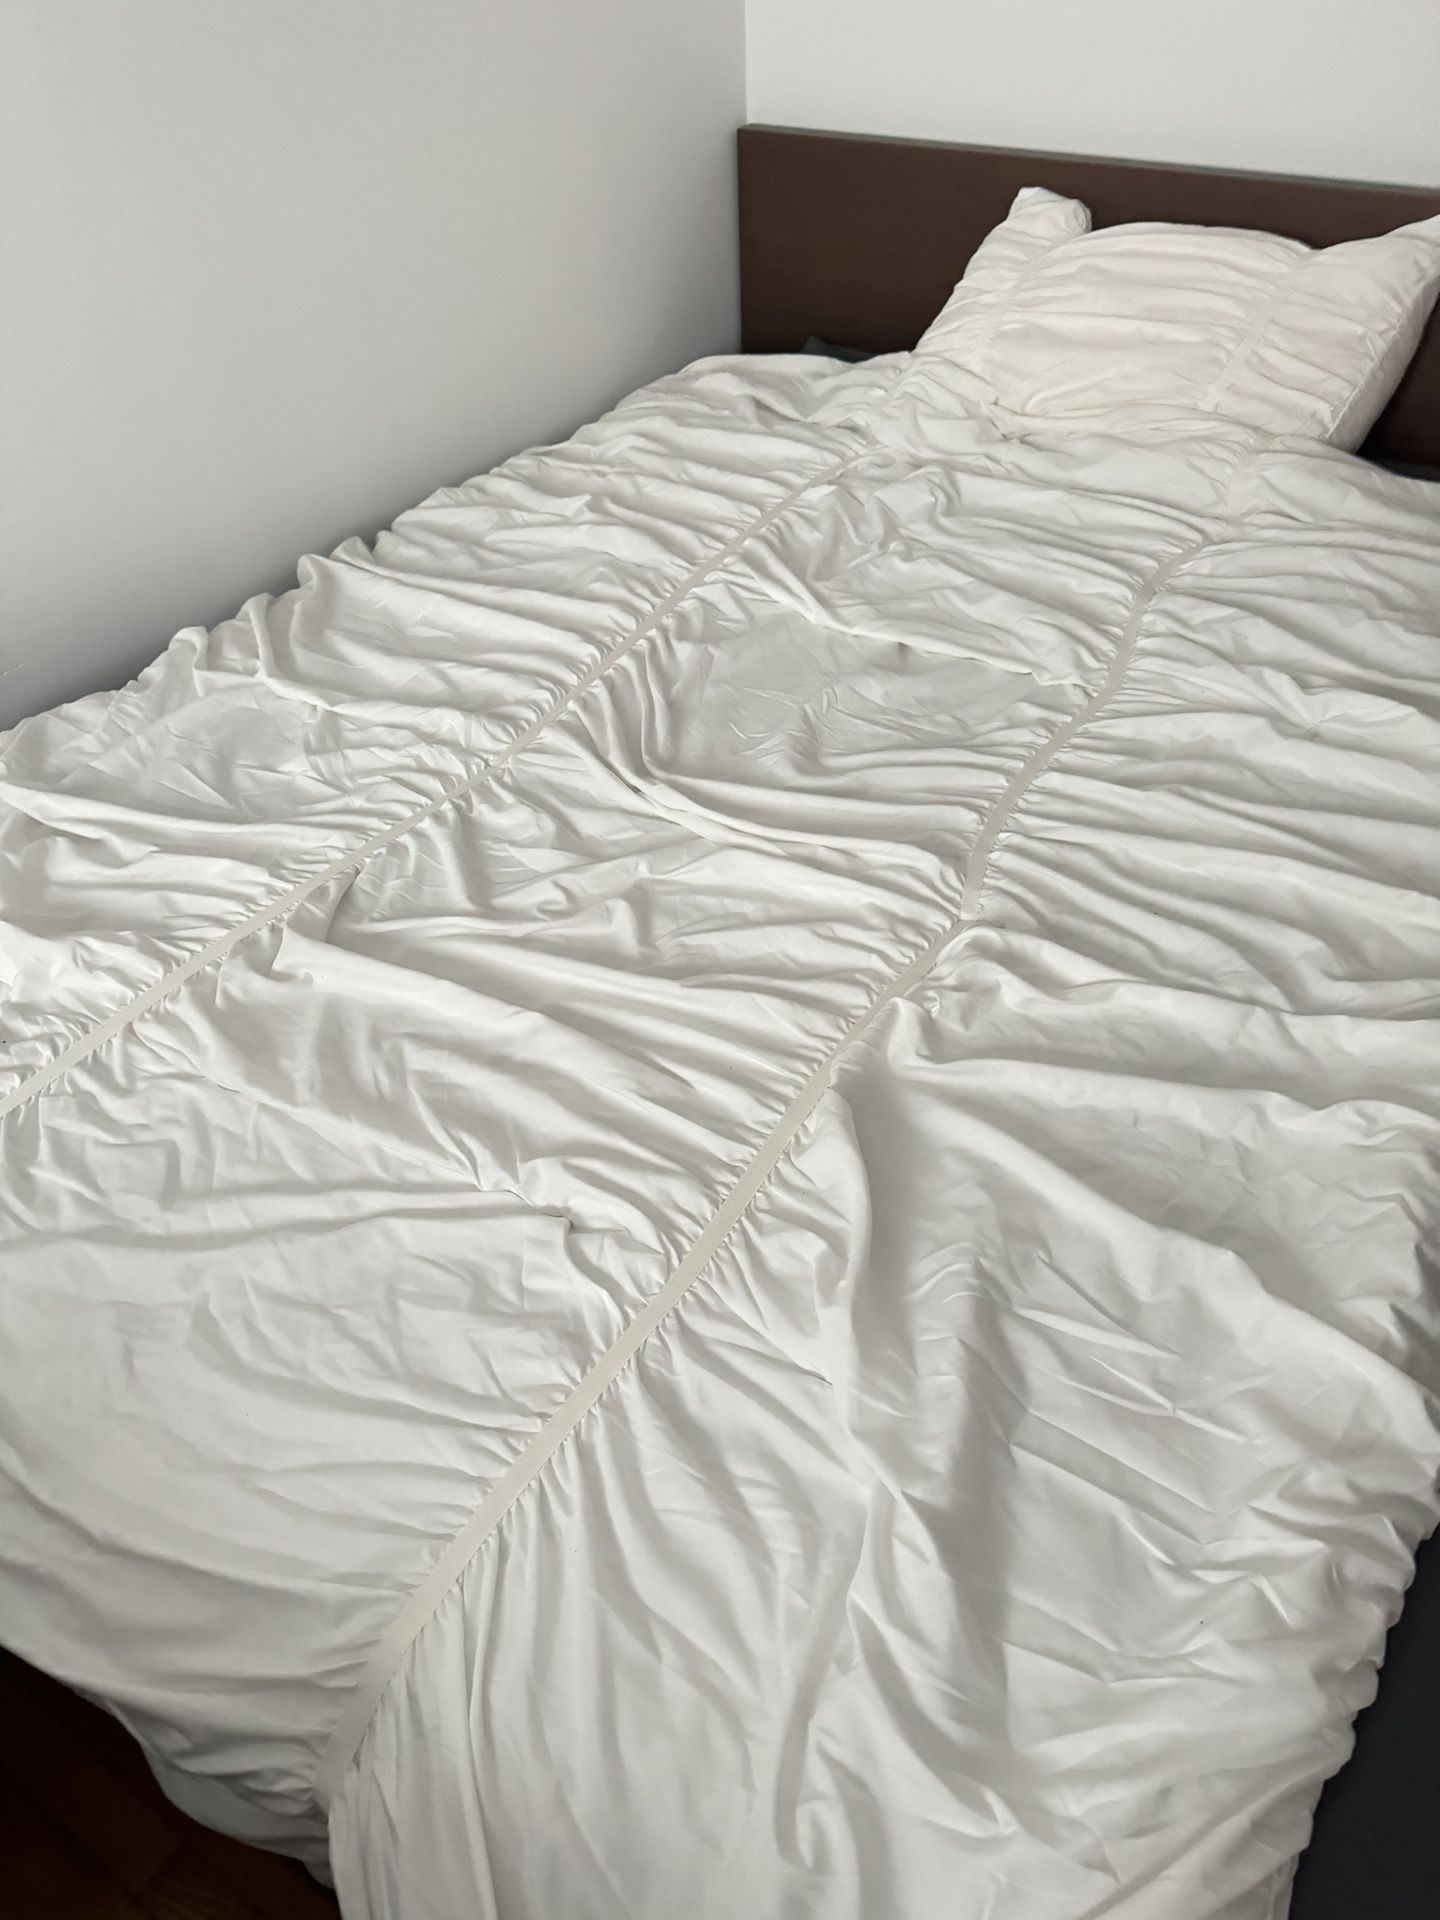 FULL SIZE WHITE CINCHED COMFORTER